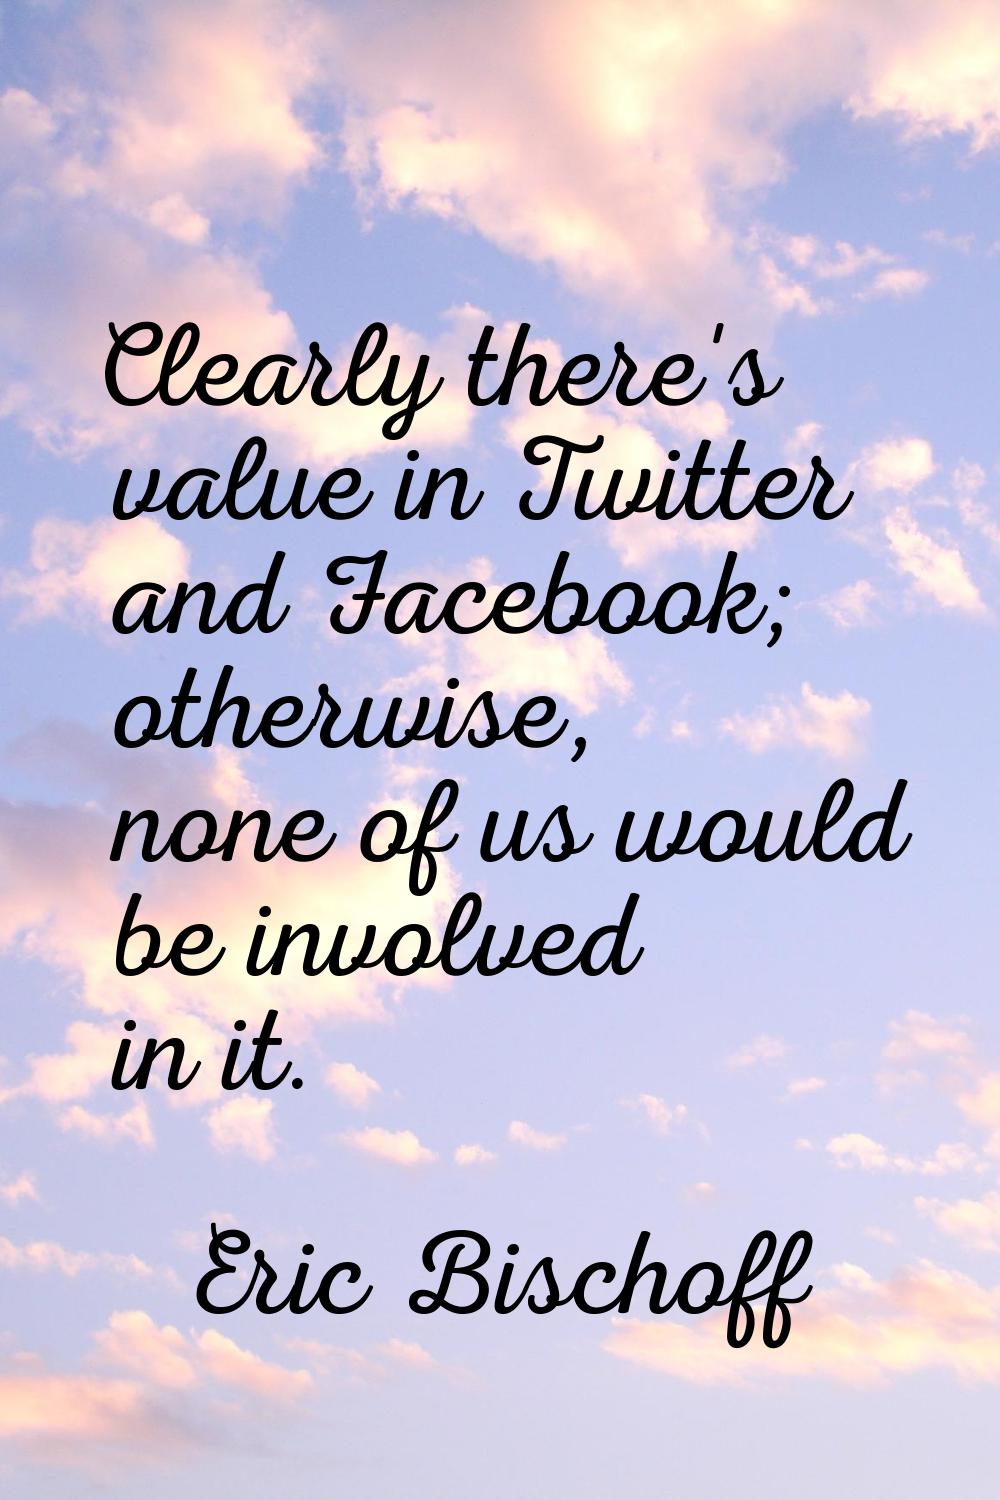 Clearly there's value in Twitter and Facebook; otherwise, none of us would be involved in it.